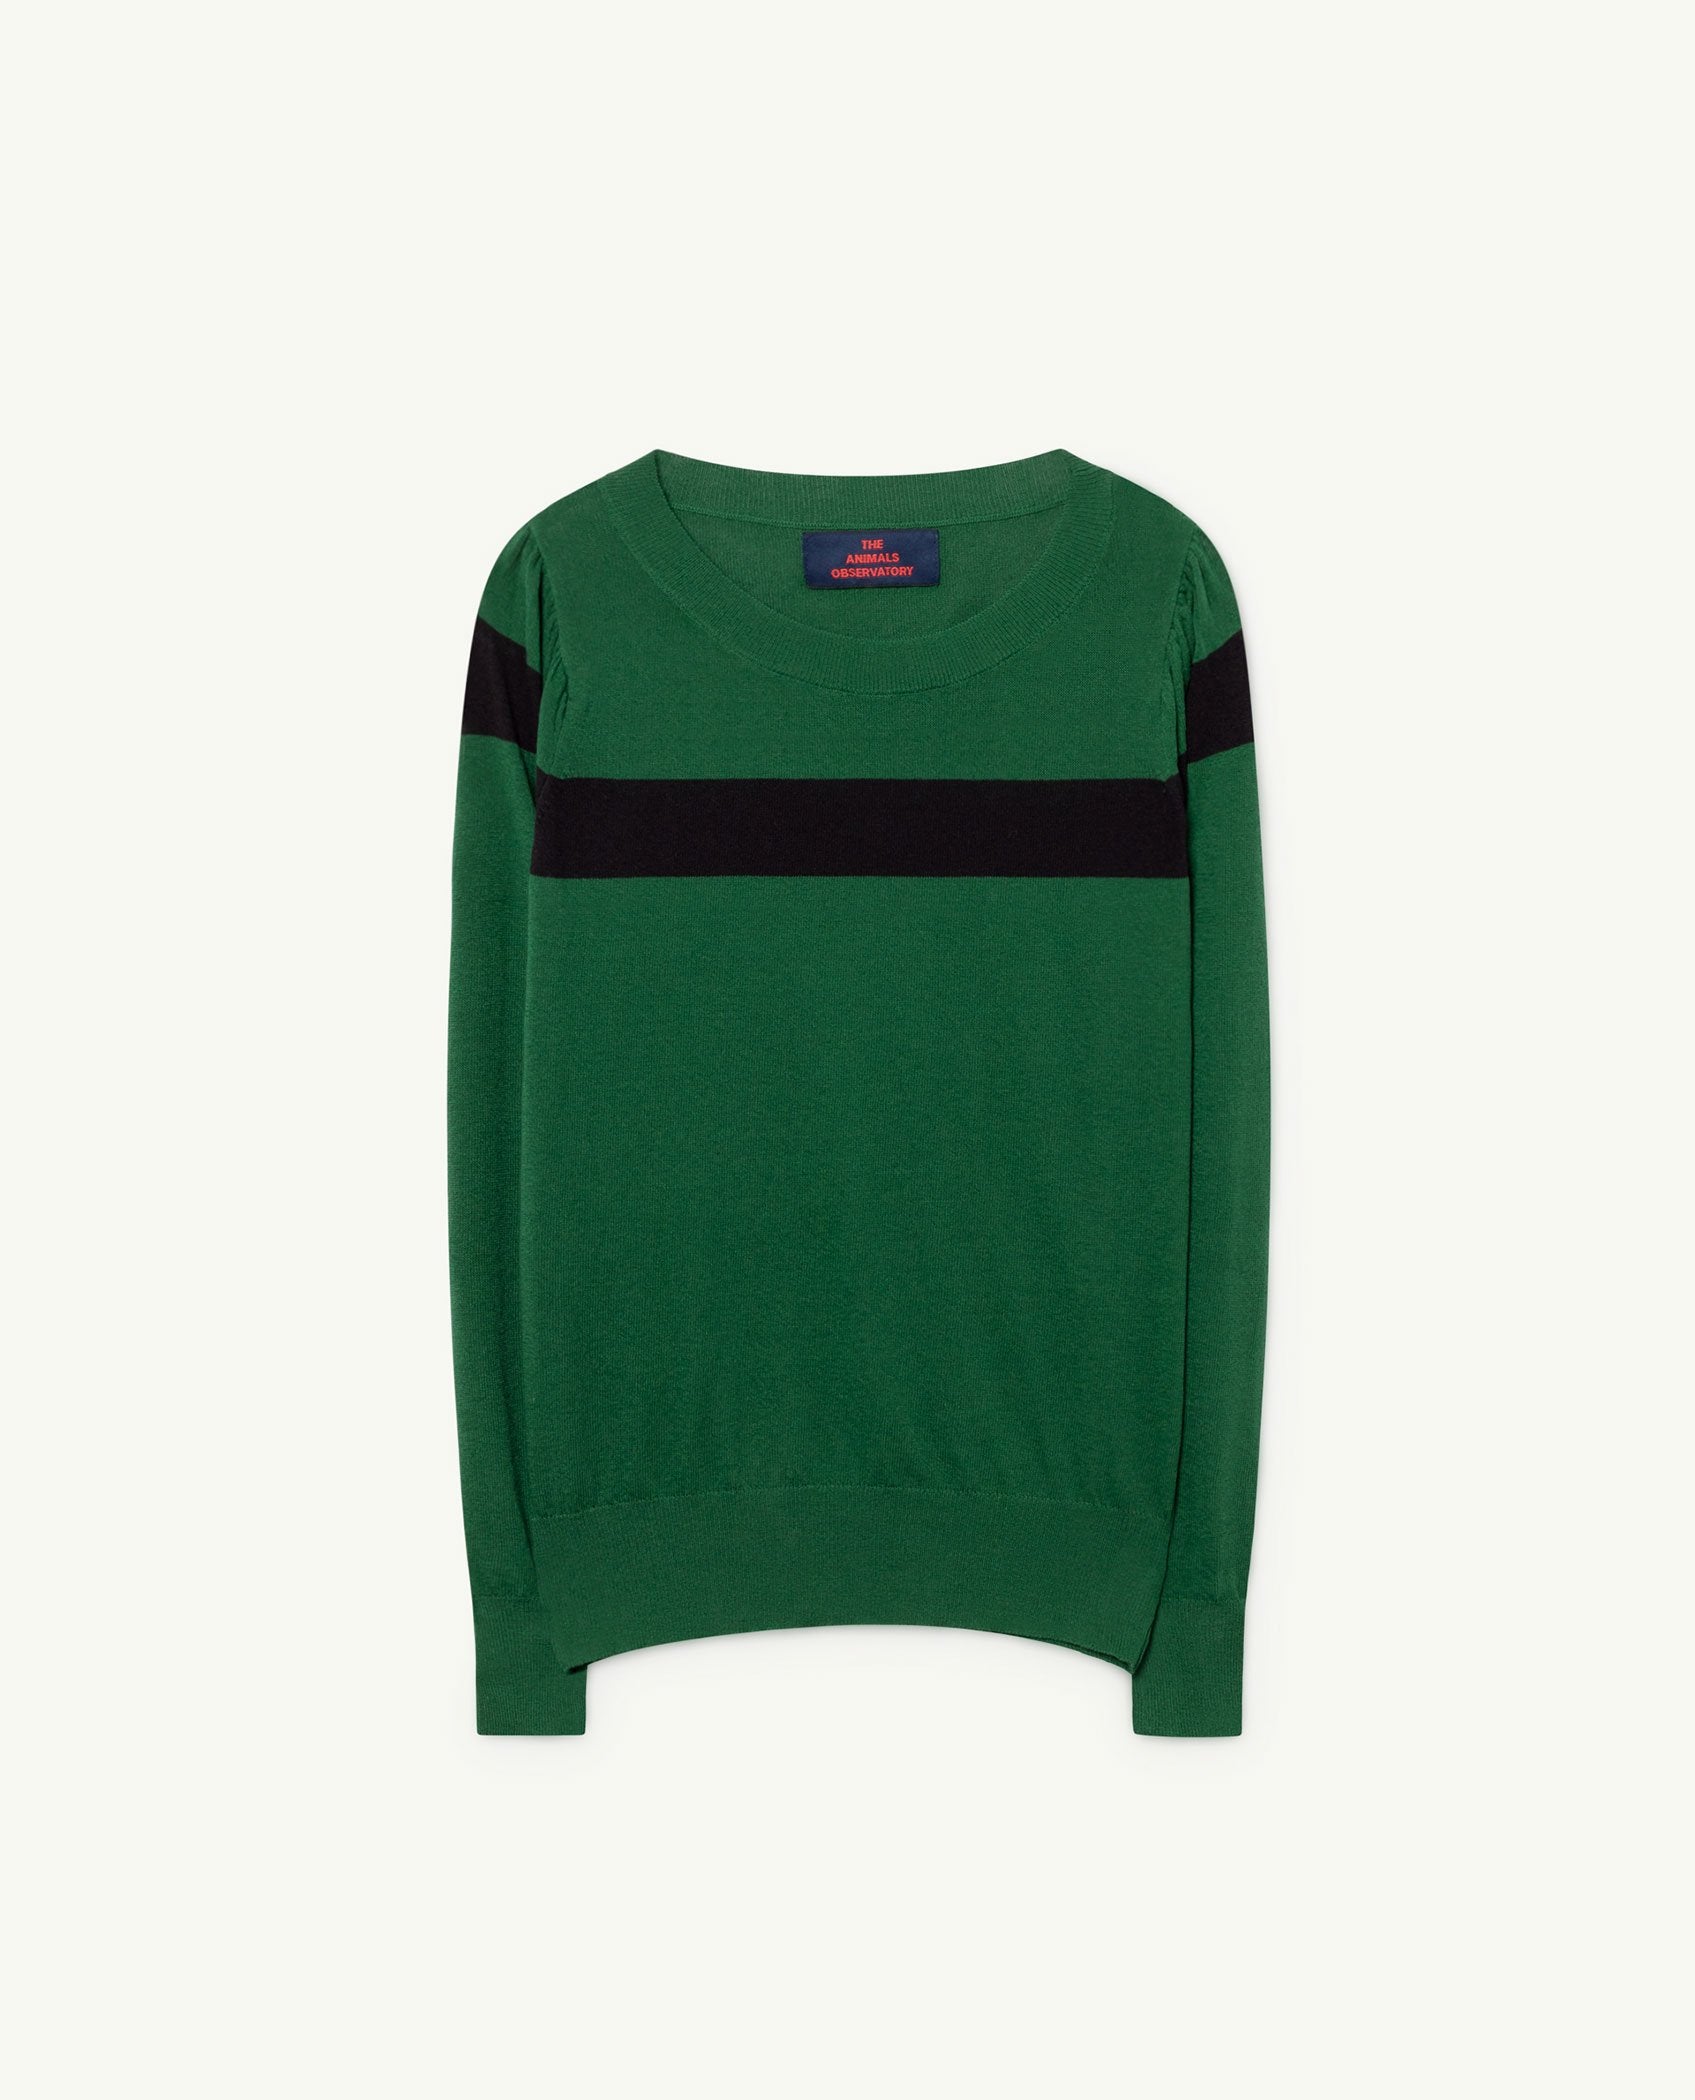 Green Condor Sweater PRODUCT FRONT